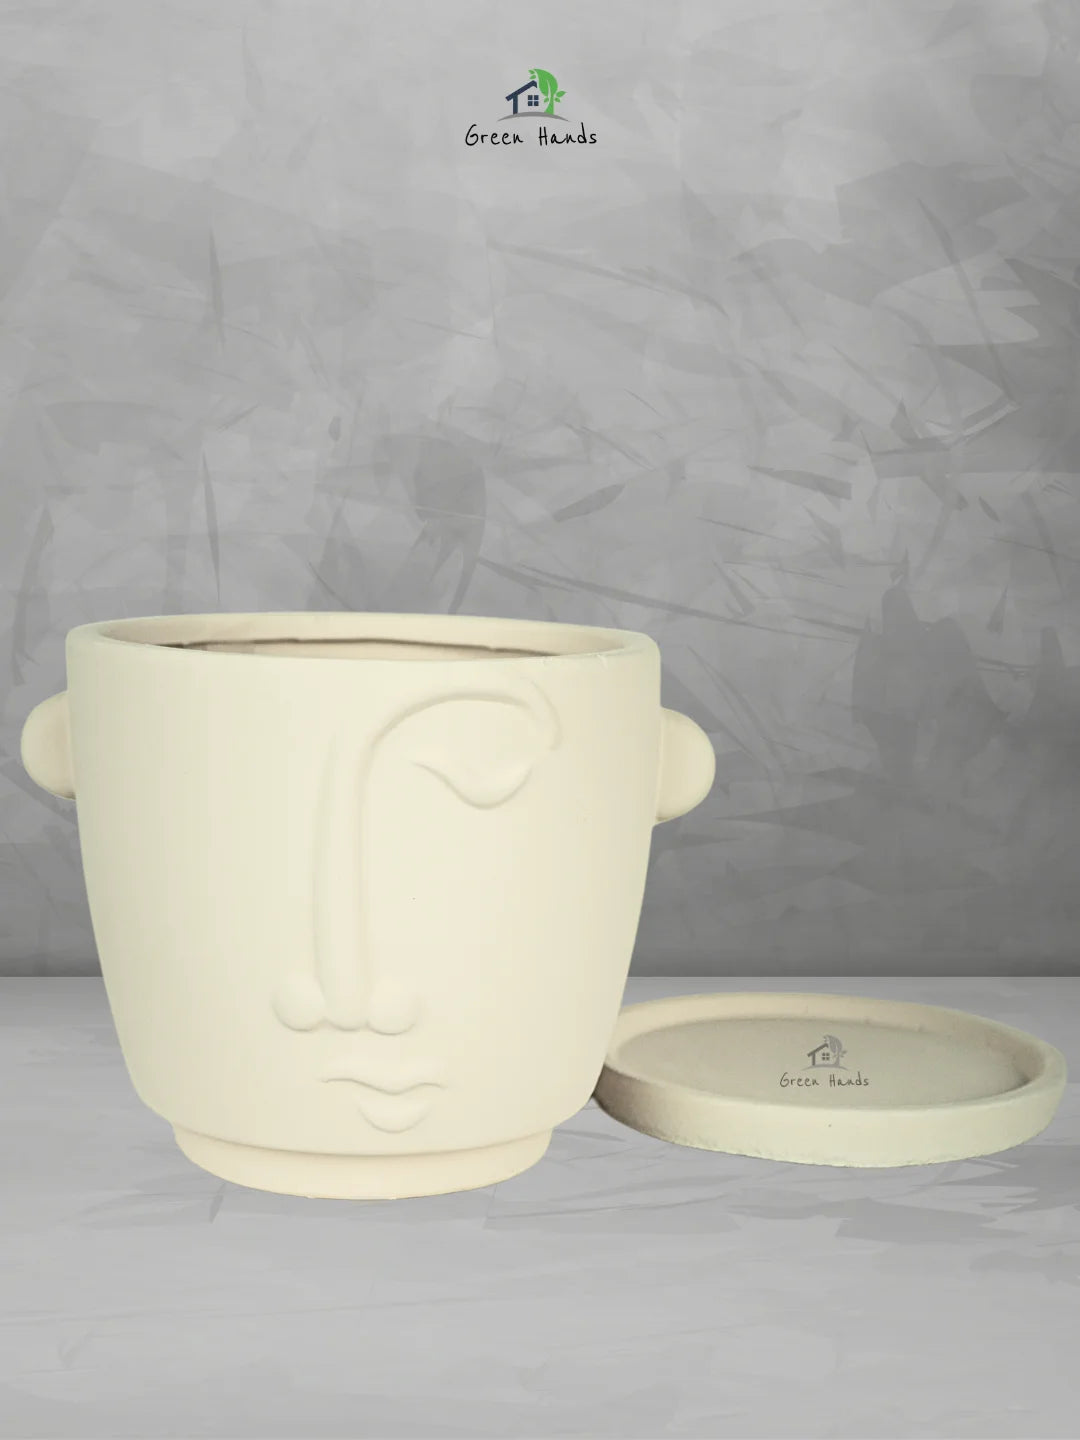 Adorable Terracotta Face Planter: The Perfect Sustainable Decorative Touch for UAE Homes